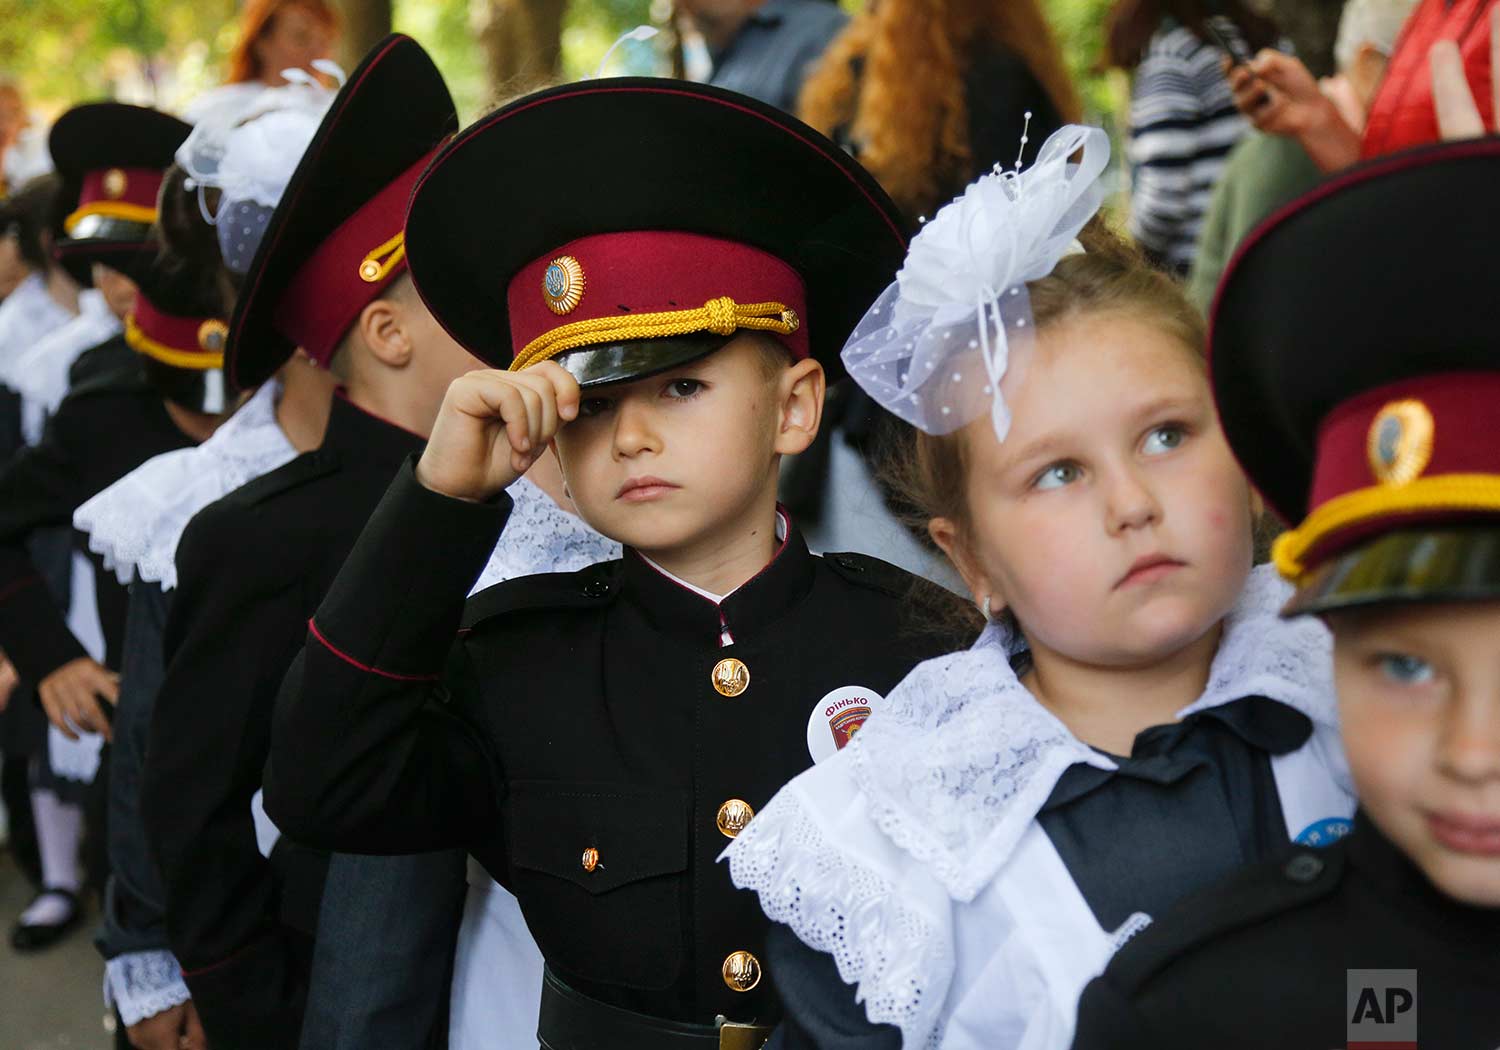  Young cadets and schoolgirls attend a ceremony on the occasion of the first day of school at a cadet lyceum in Kiev, Ukraine, Friday, Sept. 1, 2017. Ukraine marks Sept. 1 as Knowledge Day, as a traditional launch of the academic year. (AP Photo/Efre